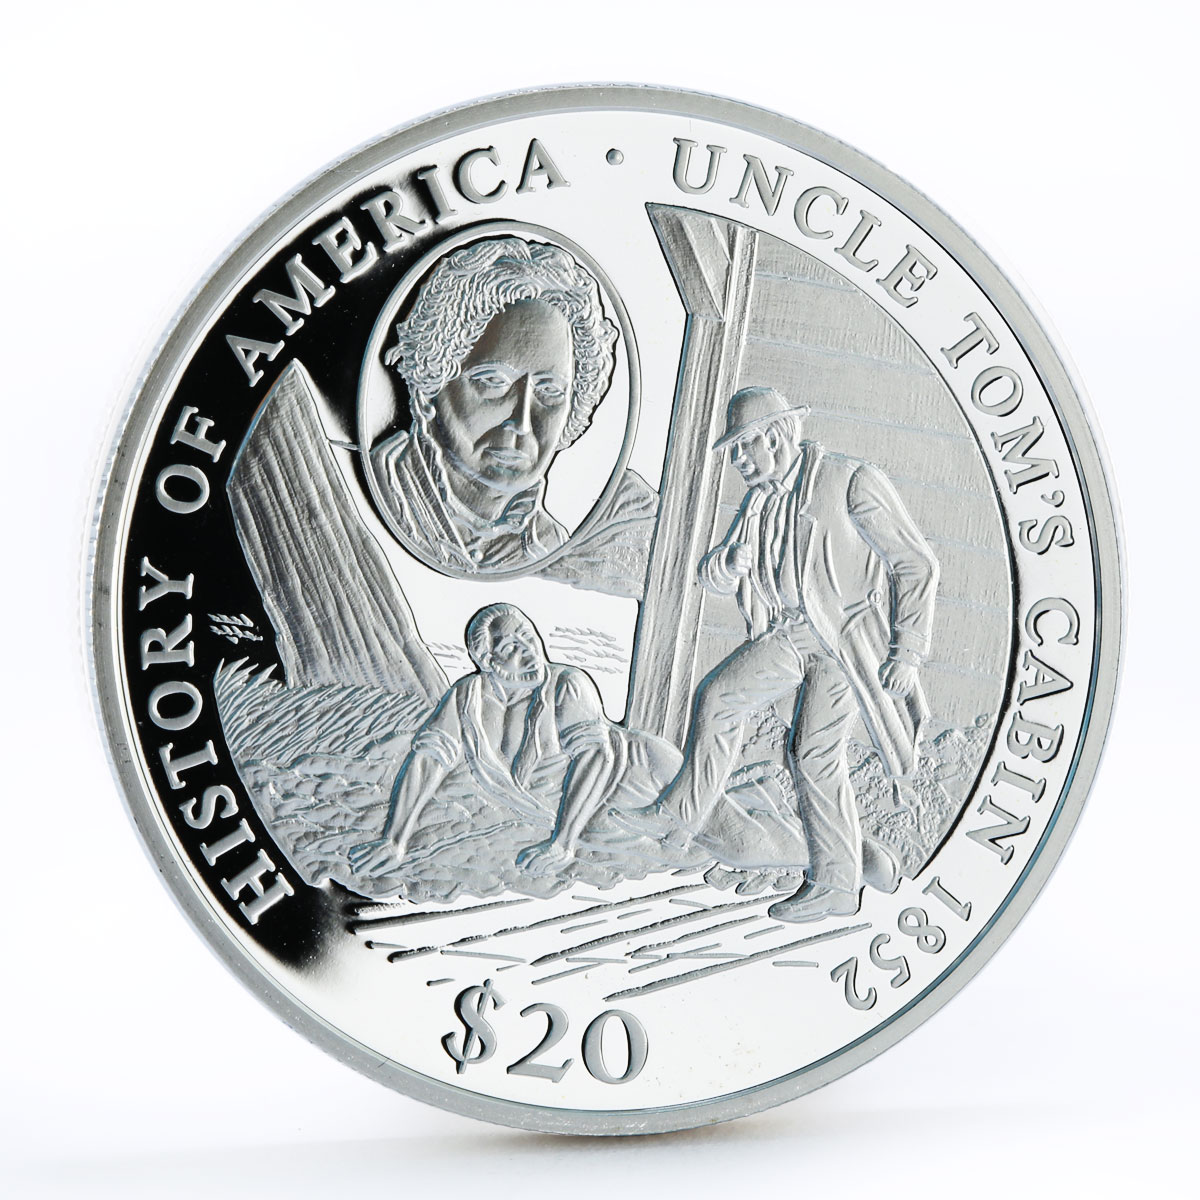 Liberia 20 dollars History of America Uncle Tom's Cab Book silver coin 2004